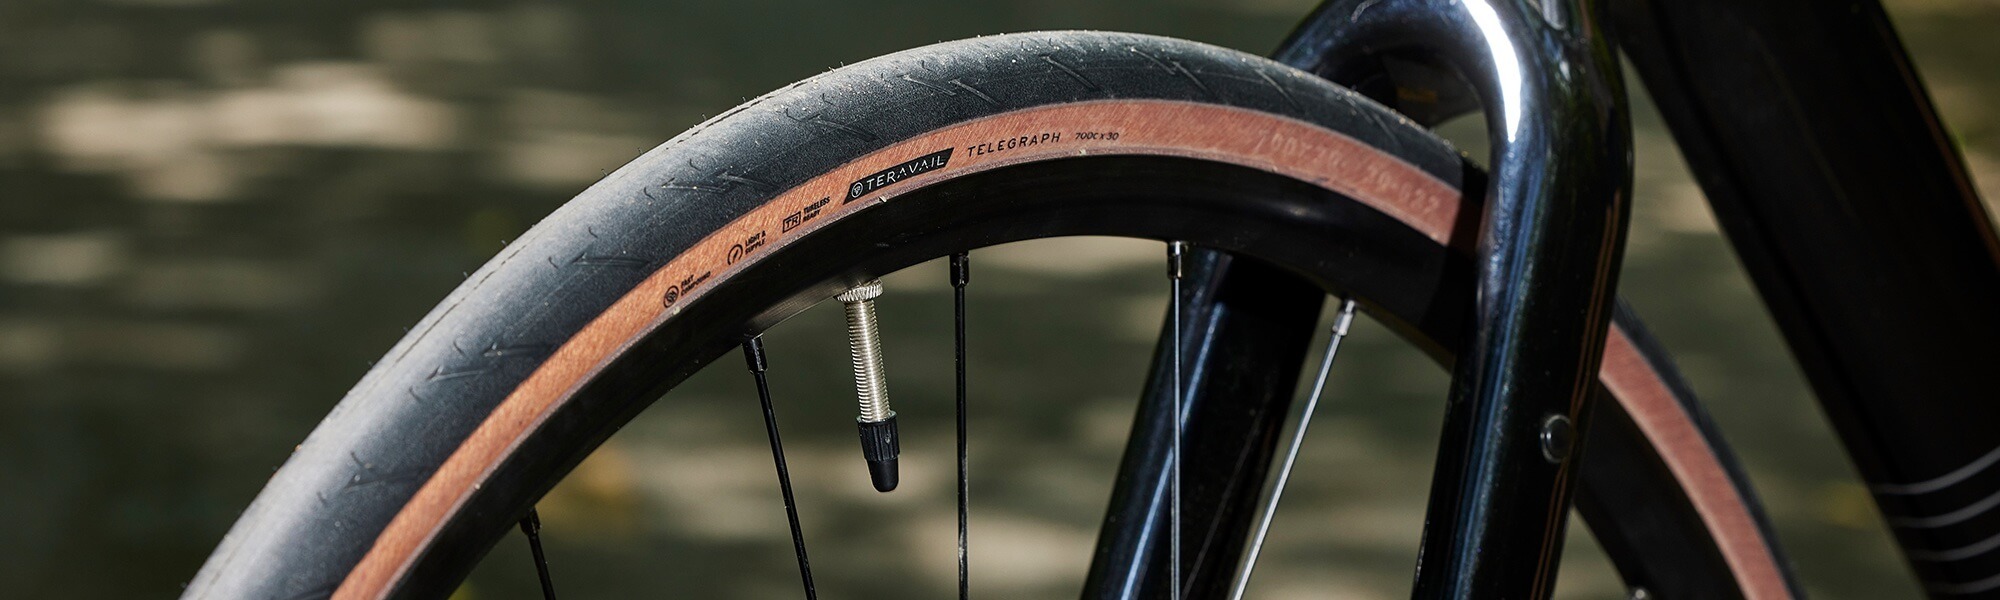 Closeup view of the front end of a bike with a Teravail Telegraph tire mounted.